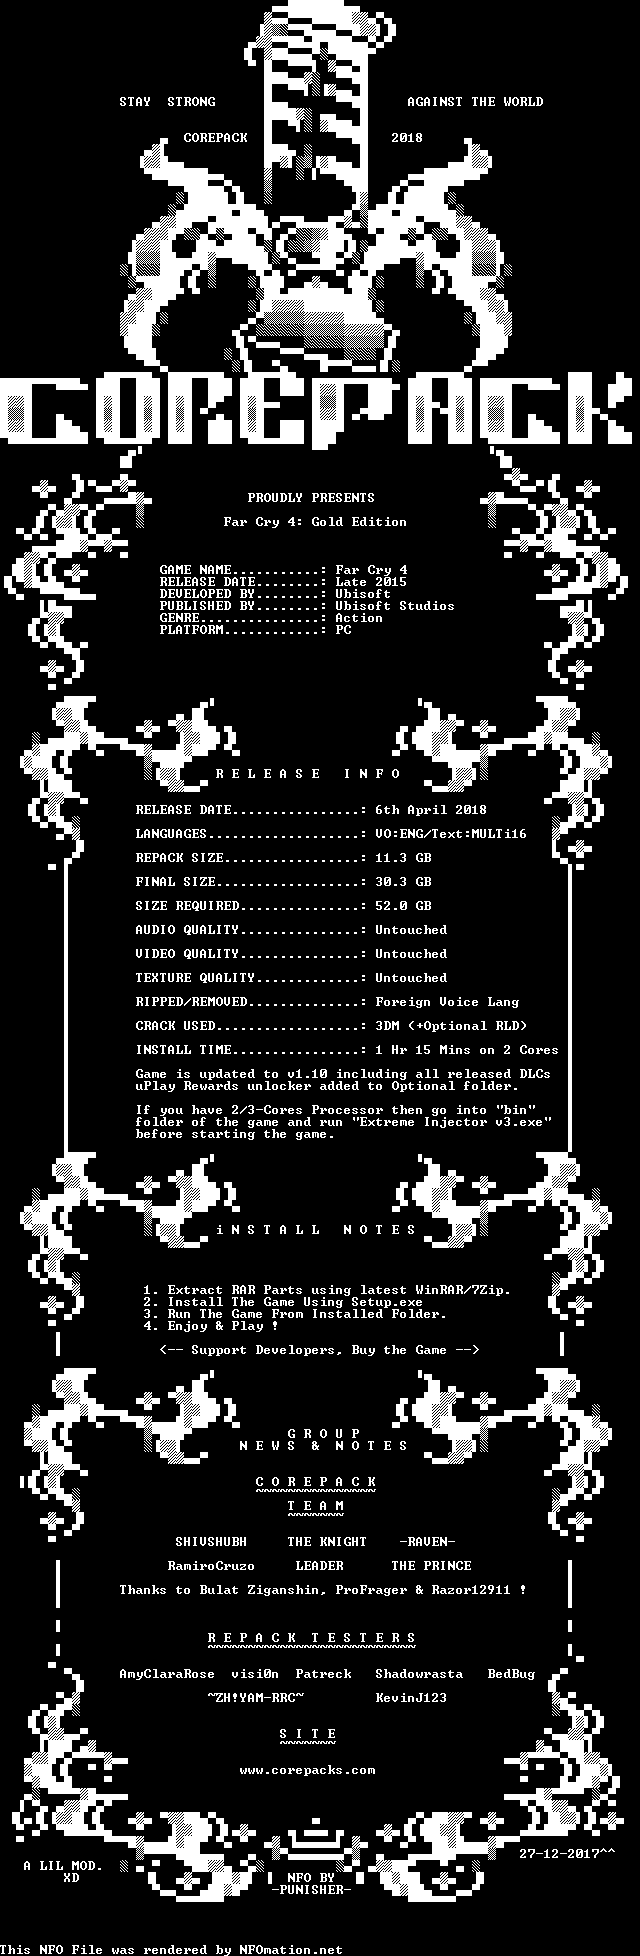 [EXCLUSIVE] FarCry4v110CompleteEditionRepackCorePack 1525366743.Far_Cry_4__v1.10__Gold_Edition-CorePack_V1.nfo